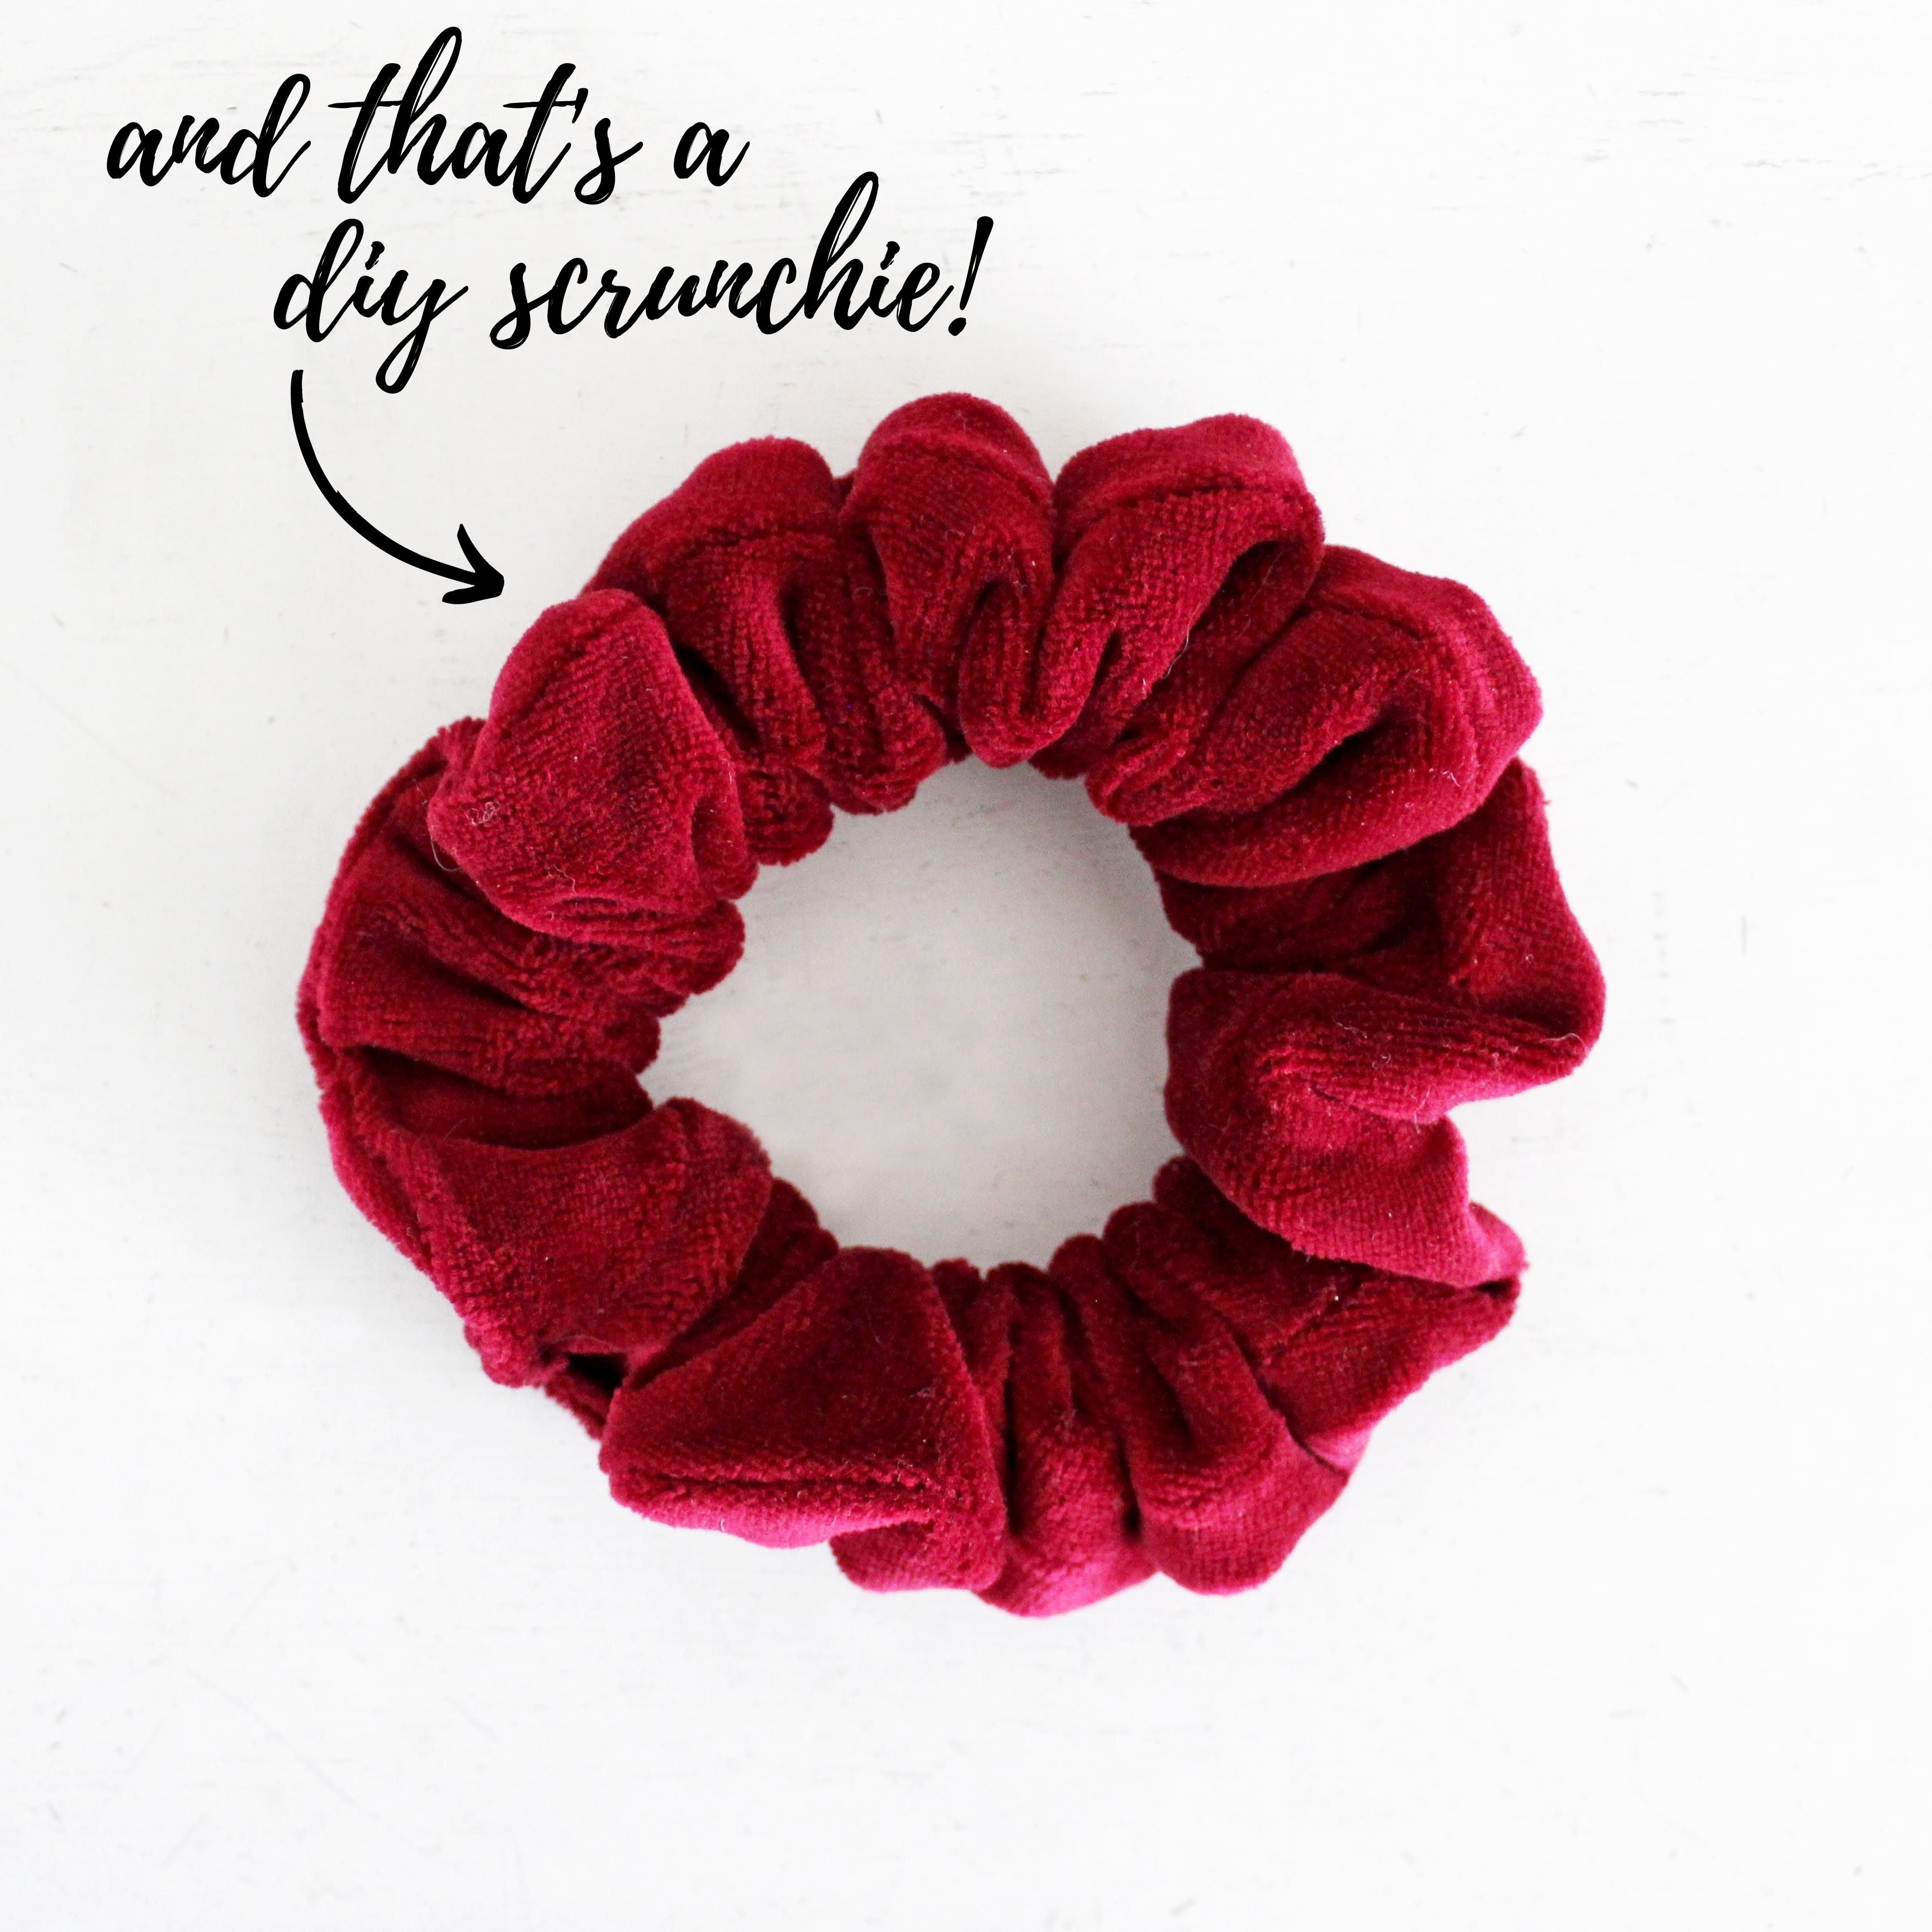 How To Make A Scrunchie DIY Sewing Tutorial: Finished DIY Scrunchie 